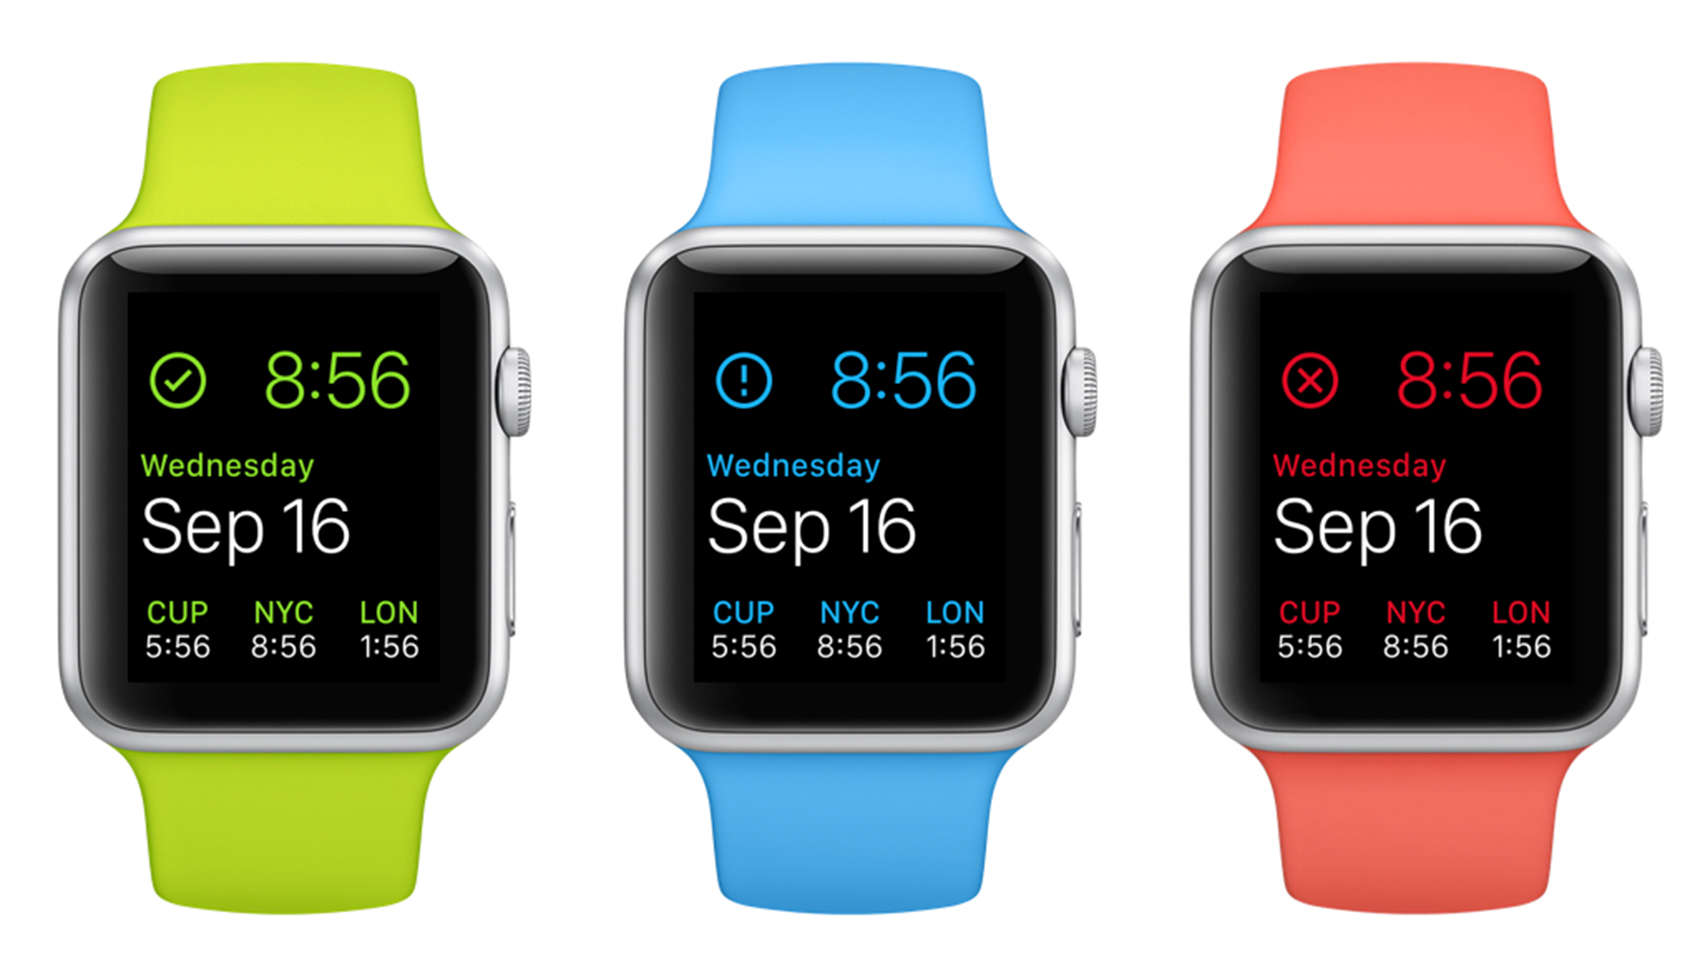 The DataMan complication, as seen in the upper left of these Apple Watches, monitors your data usage.